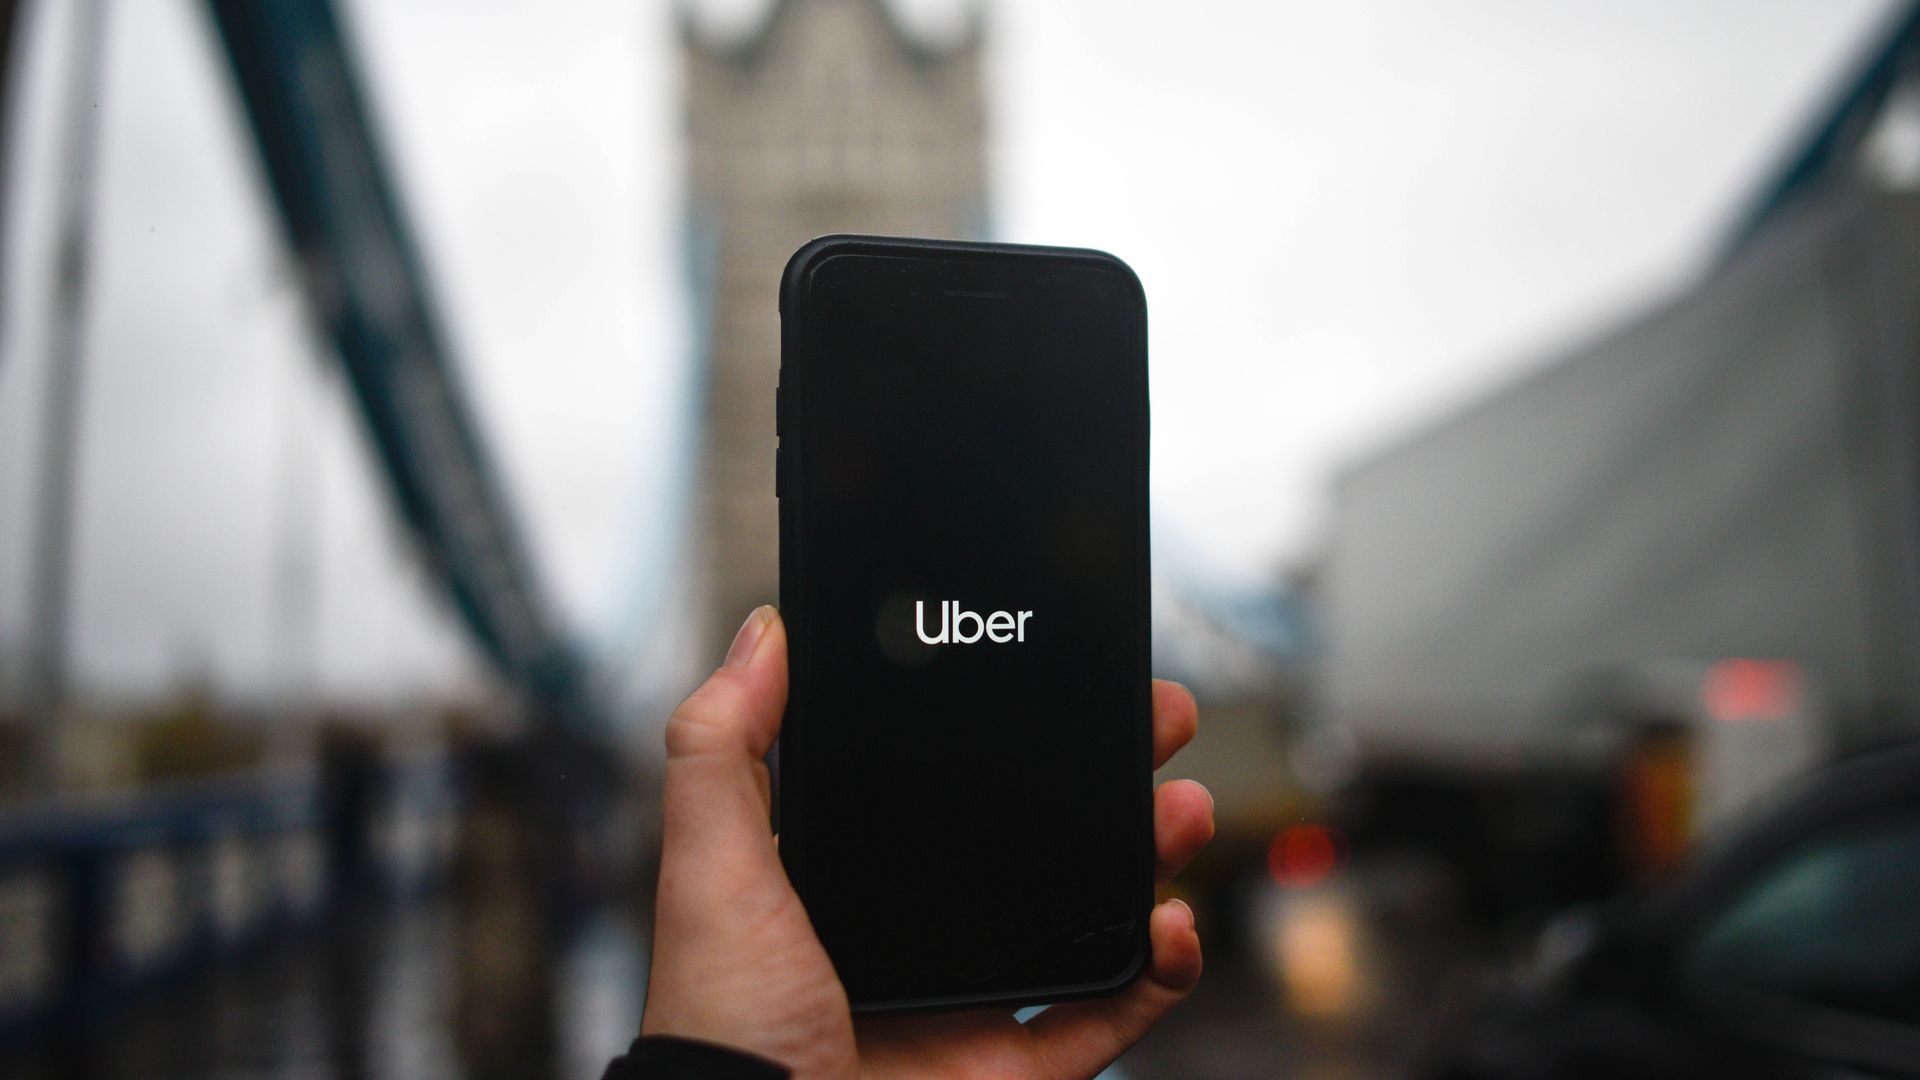 Uber logo on a phone in London